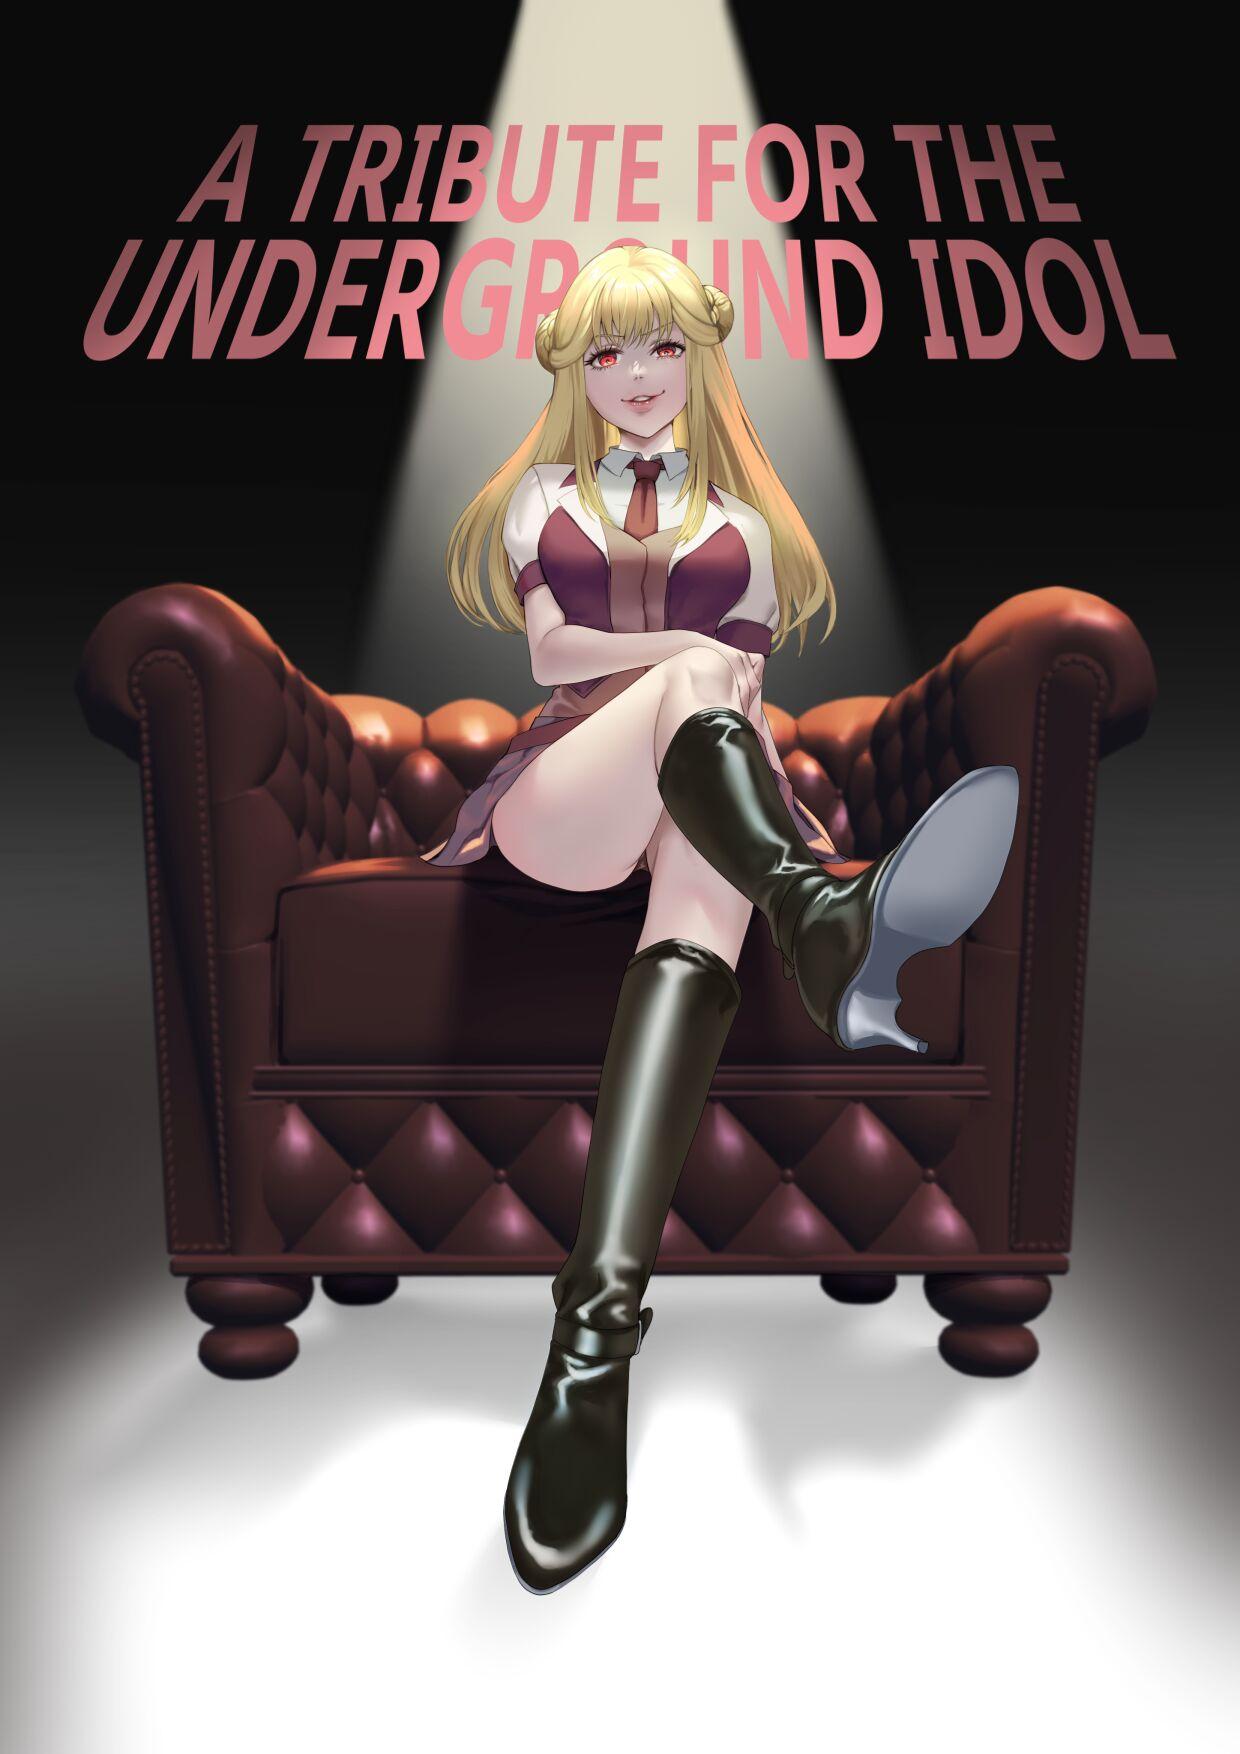 Socks Mitsugase Chika Idol  | A TRIBUTE FOR THE UNDERGROUND IDOL Exposed - Page 1